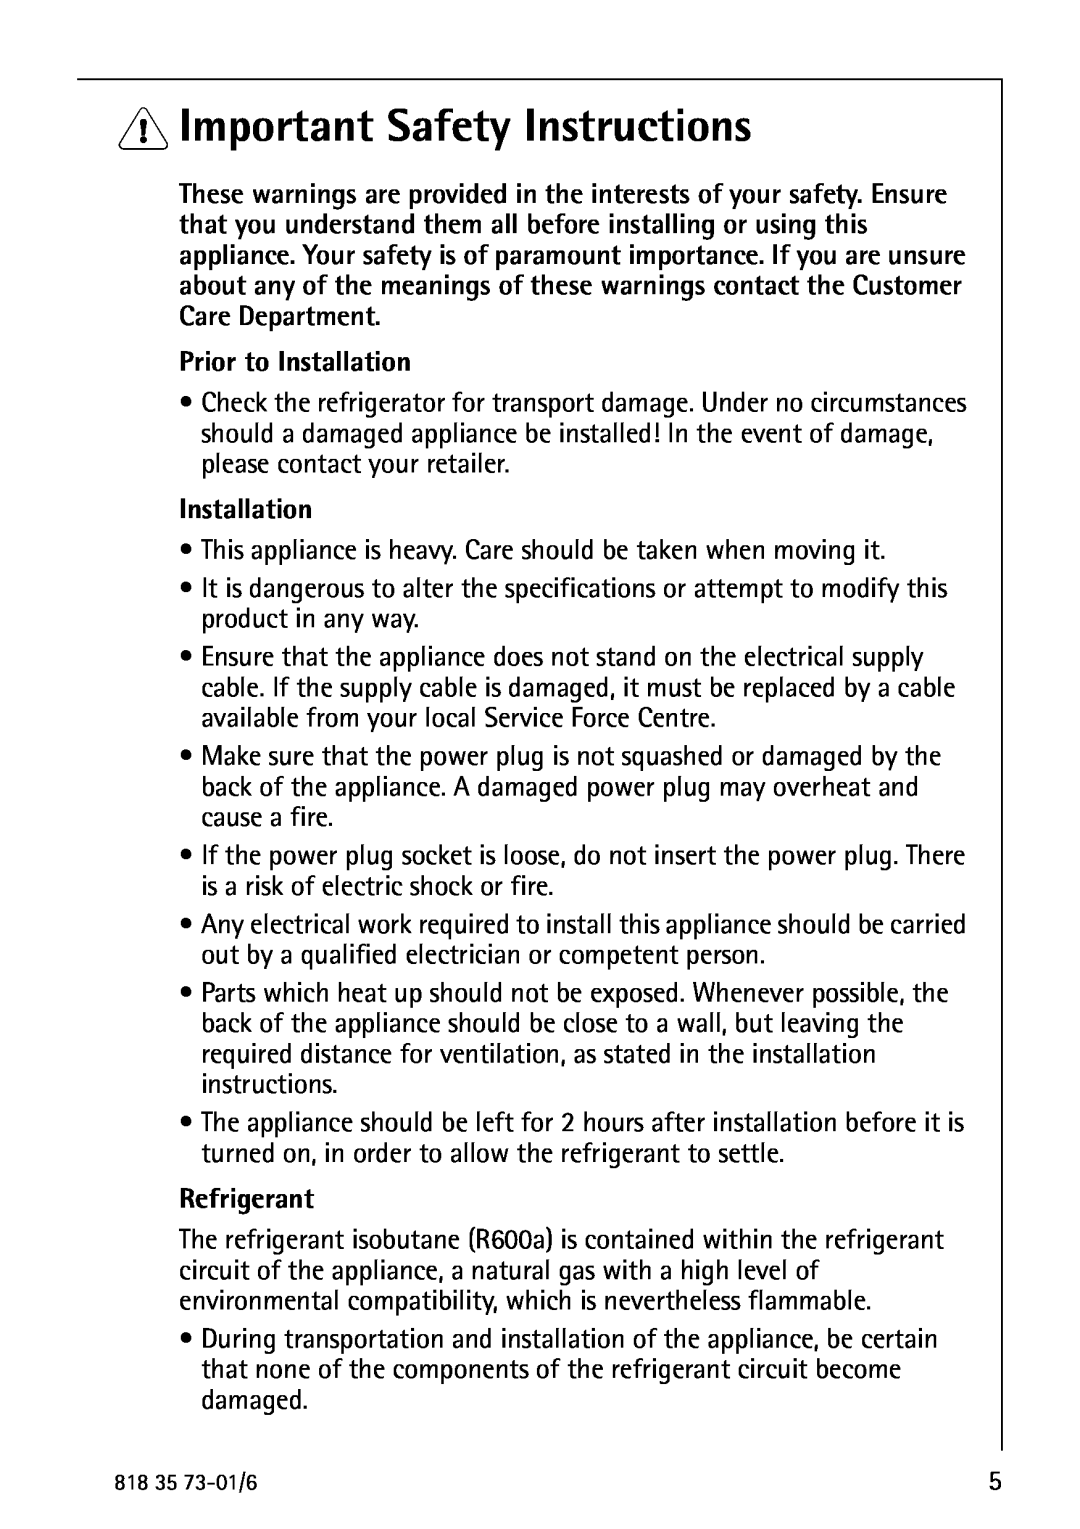 Electrolux SANTO 72340 KA operating instructions Important Safety Instructions, Prior to Installation, Refrigerant 